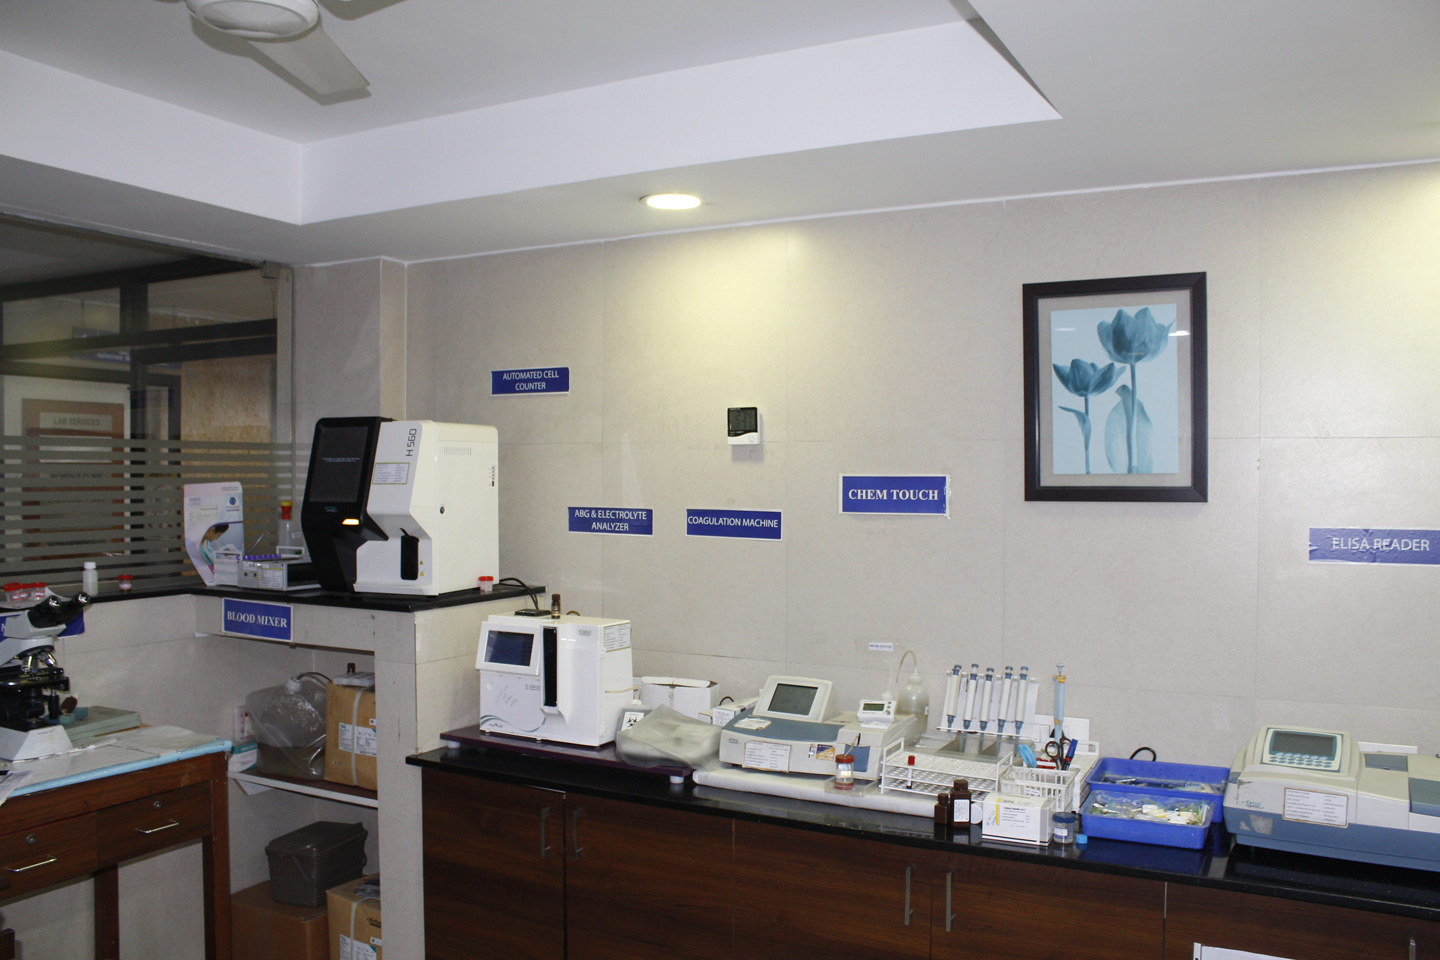 A view of the lab infrastructure at Sri Balaji Hospital showing blood mixture, automated cell counter, and other equipment.